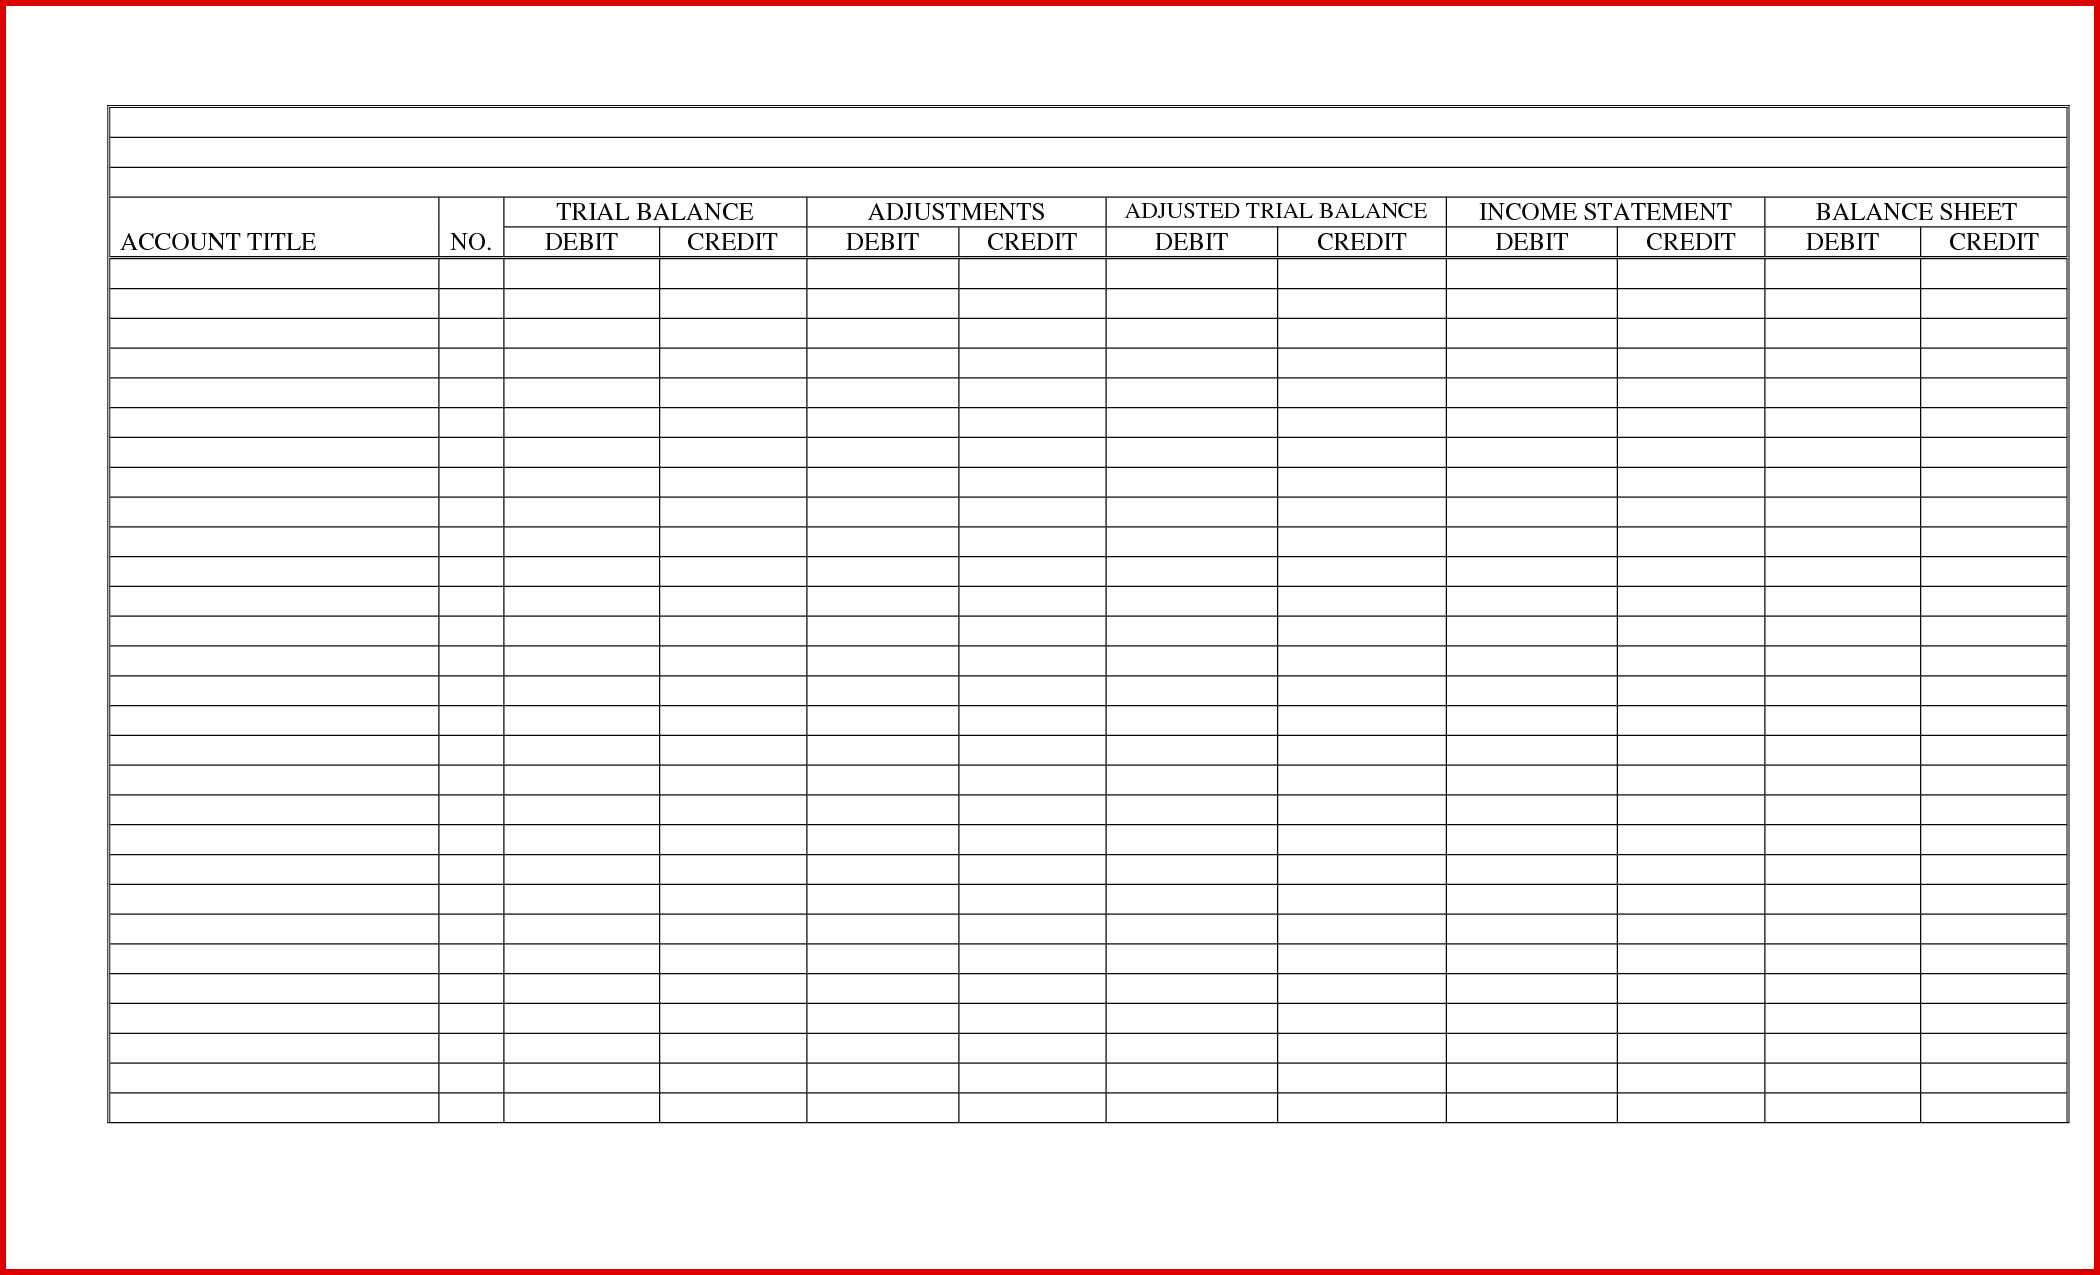 Accounting Spreadsheet Template | Sosfuer Spreadsheet within Accounting Spreadsheet Template